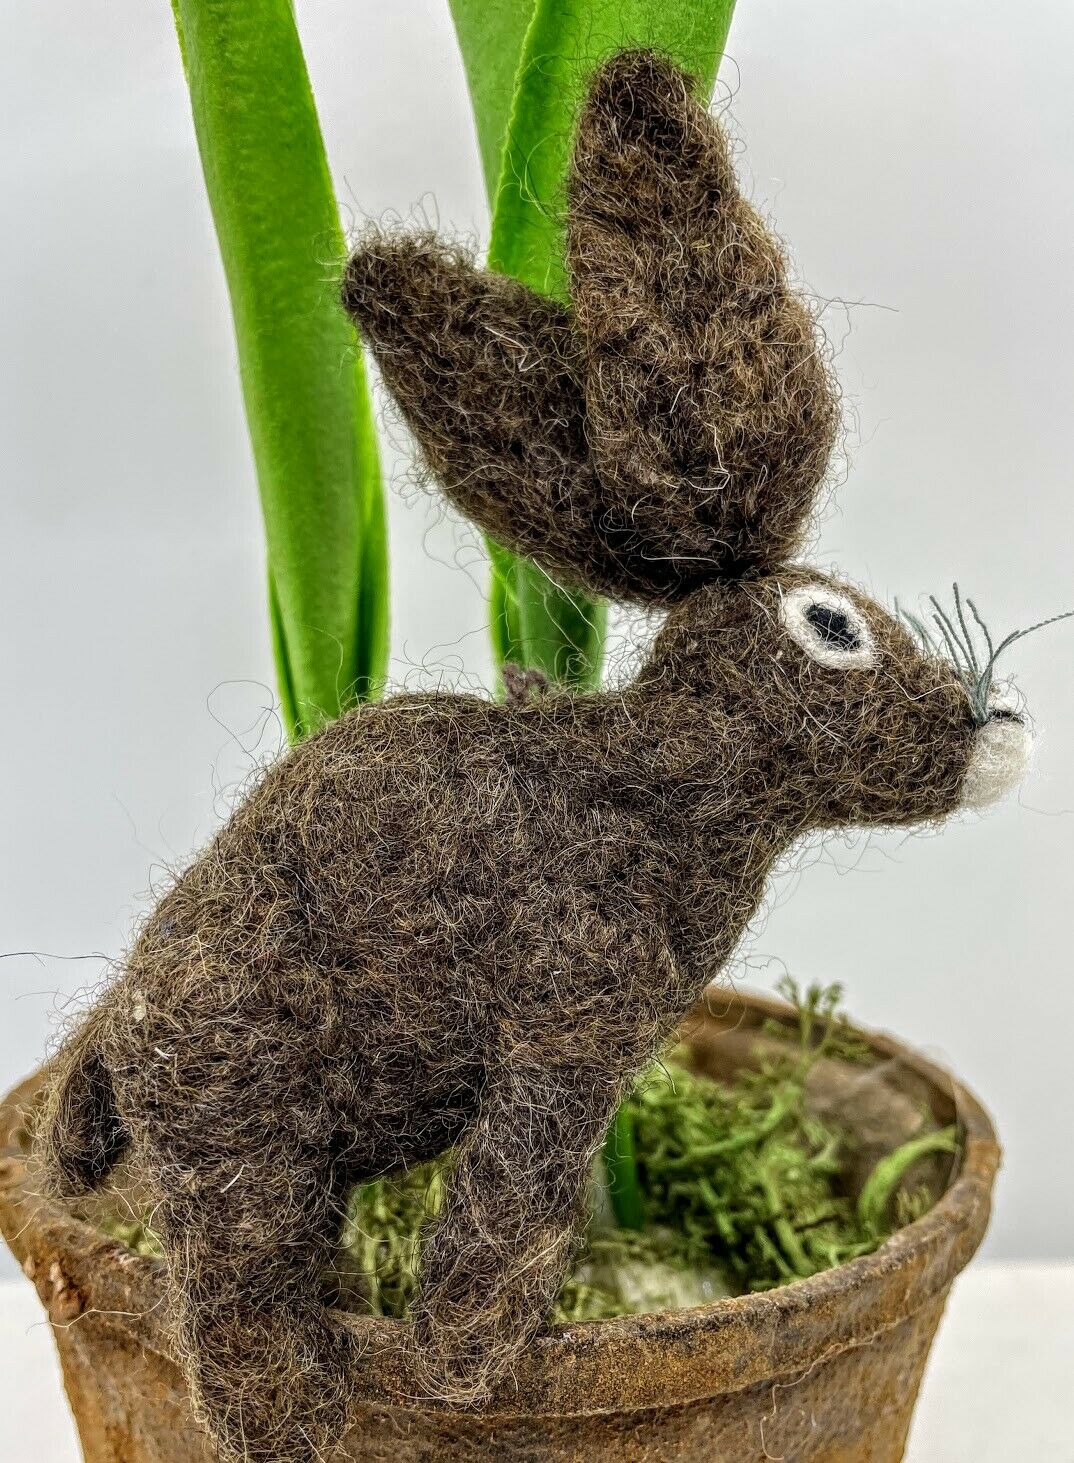 Primitive Folk Art Handmade Felted Brown Bunny Ornament 3&quot;x2&quot; - The Primitive Pineapple Collection